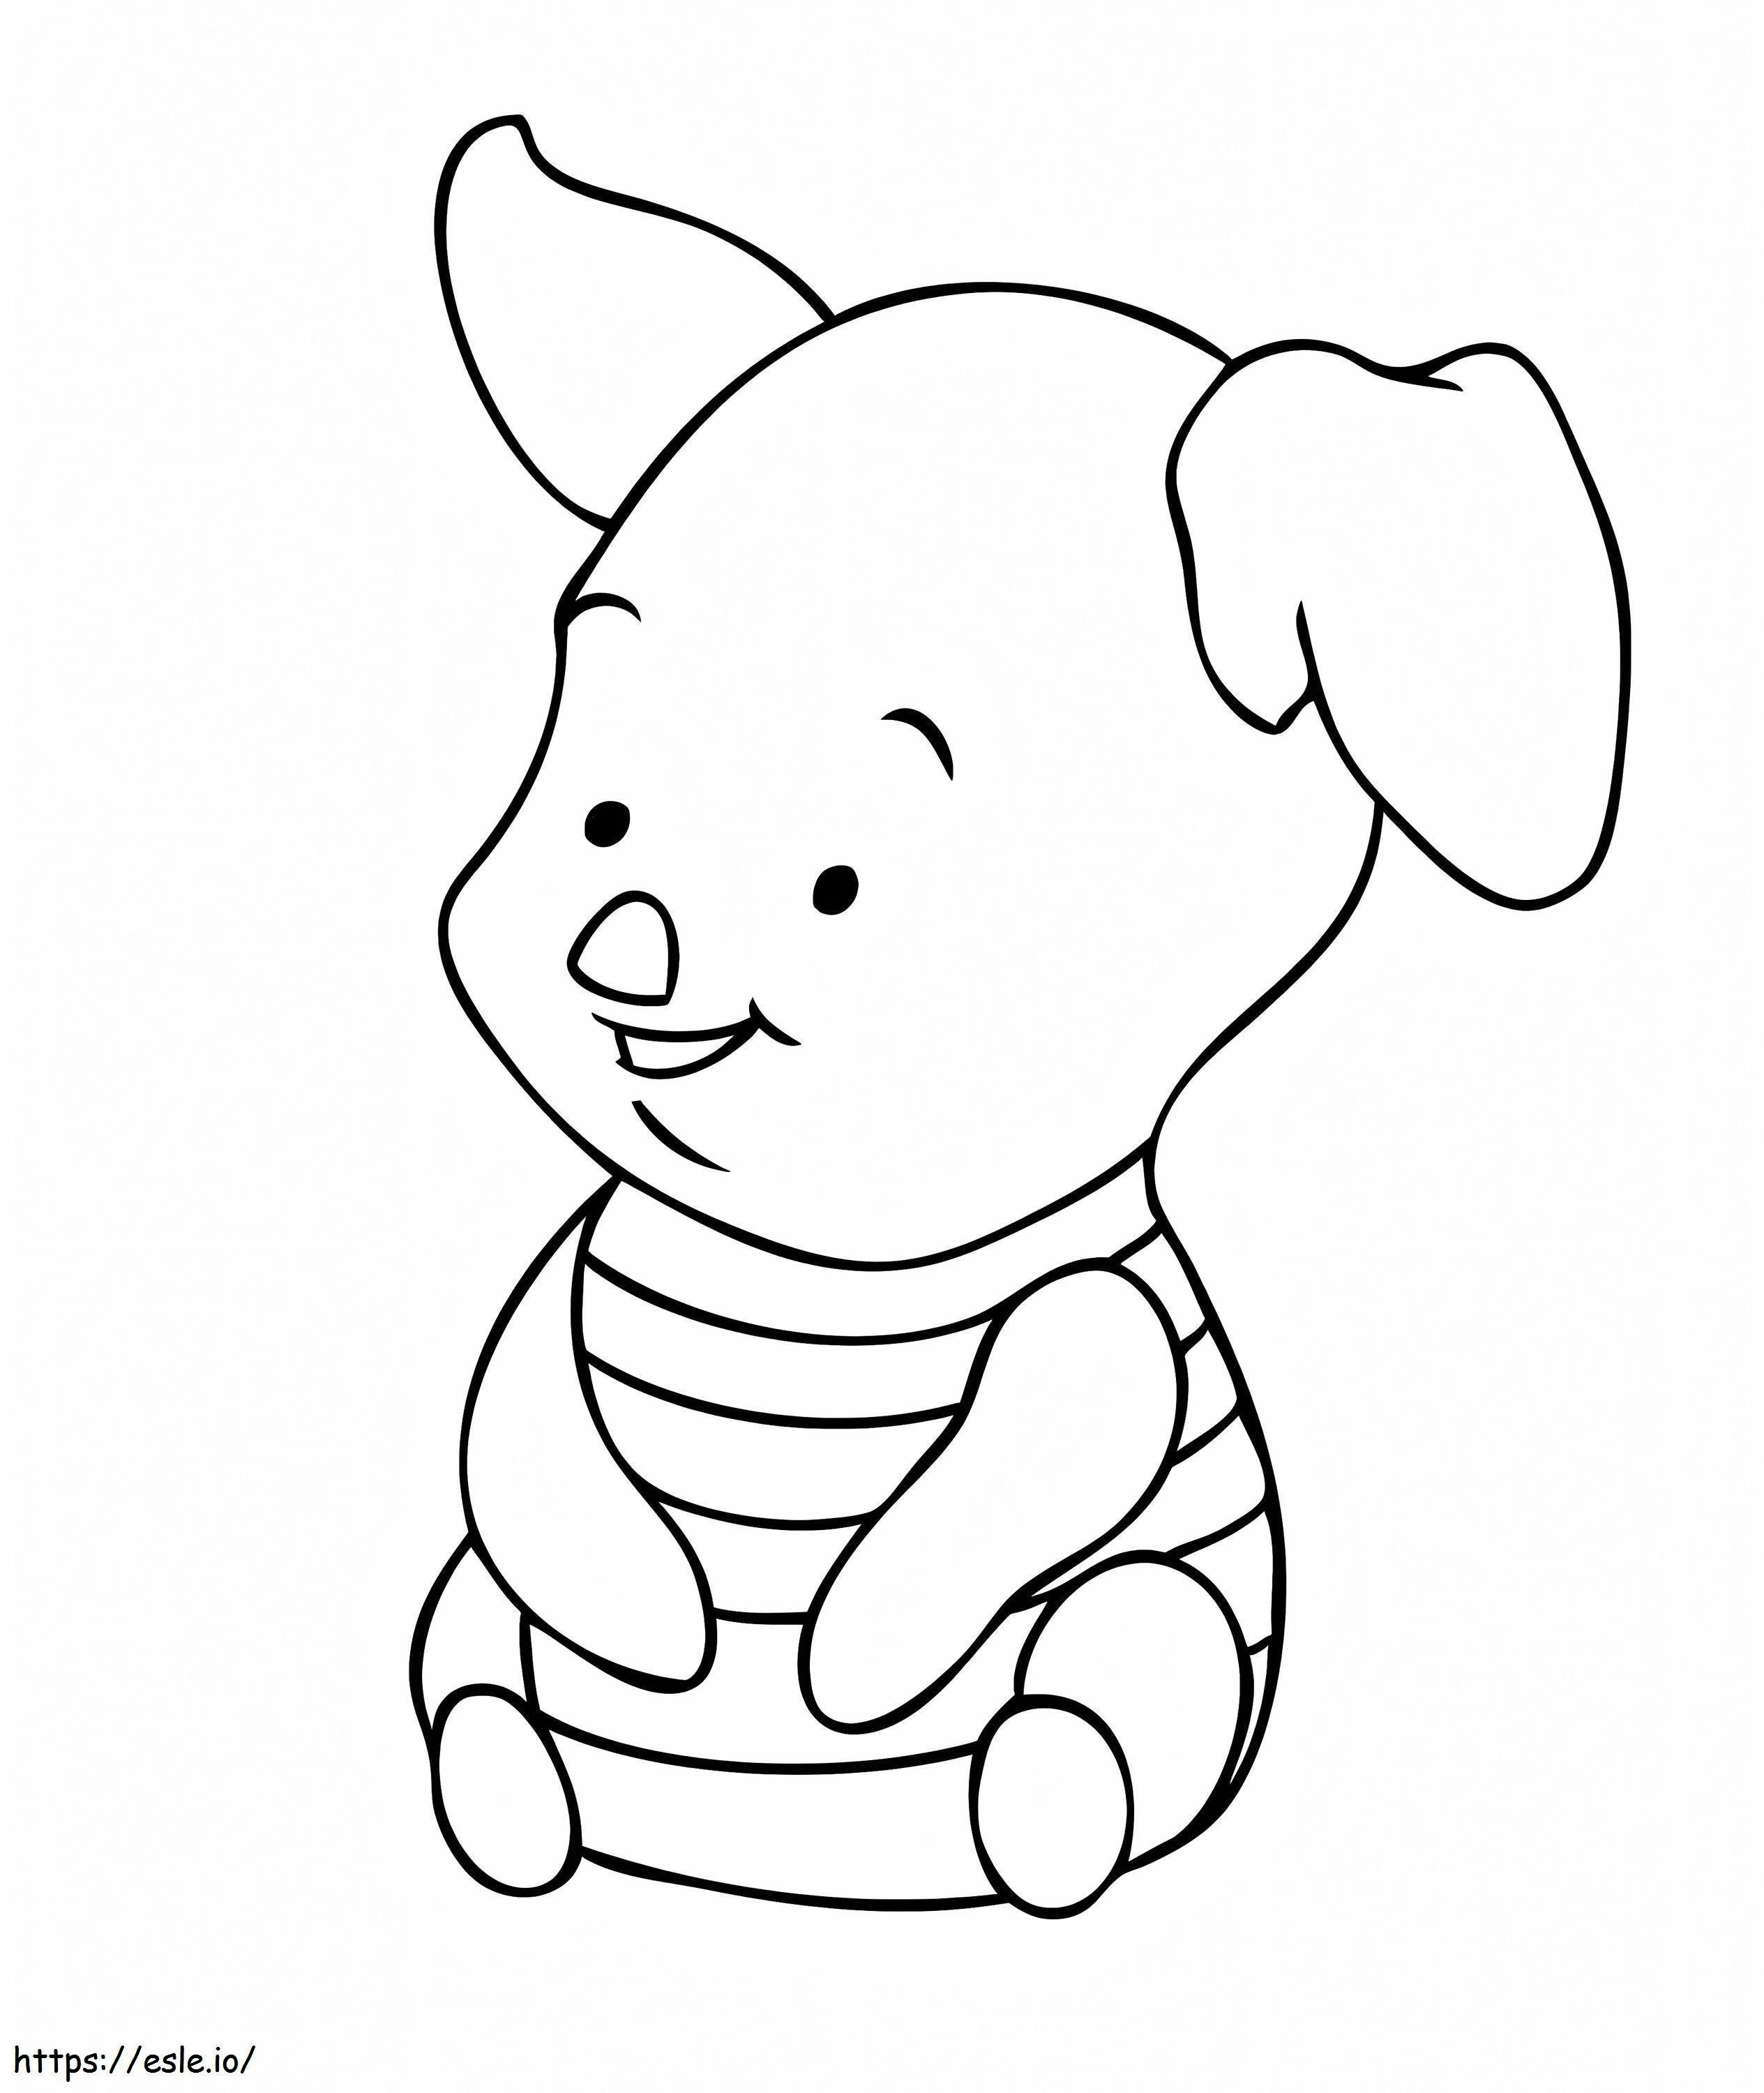 Baby Piglet coloring page